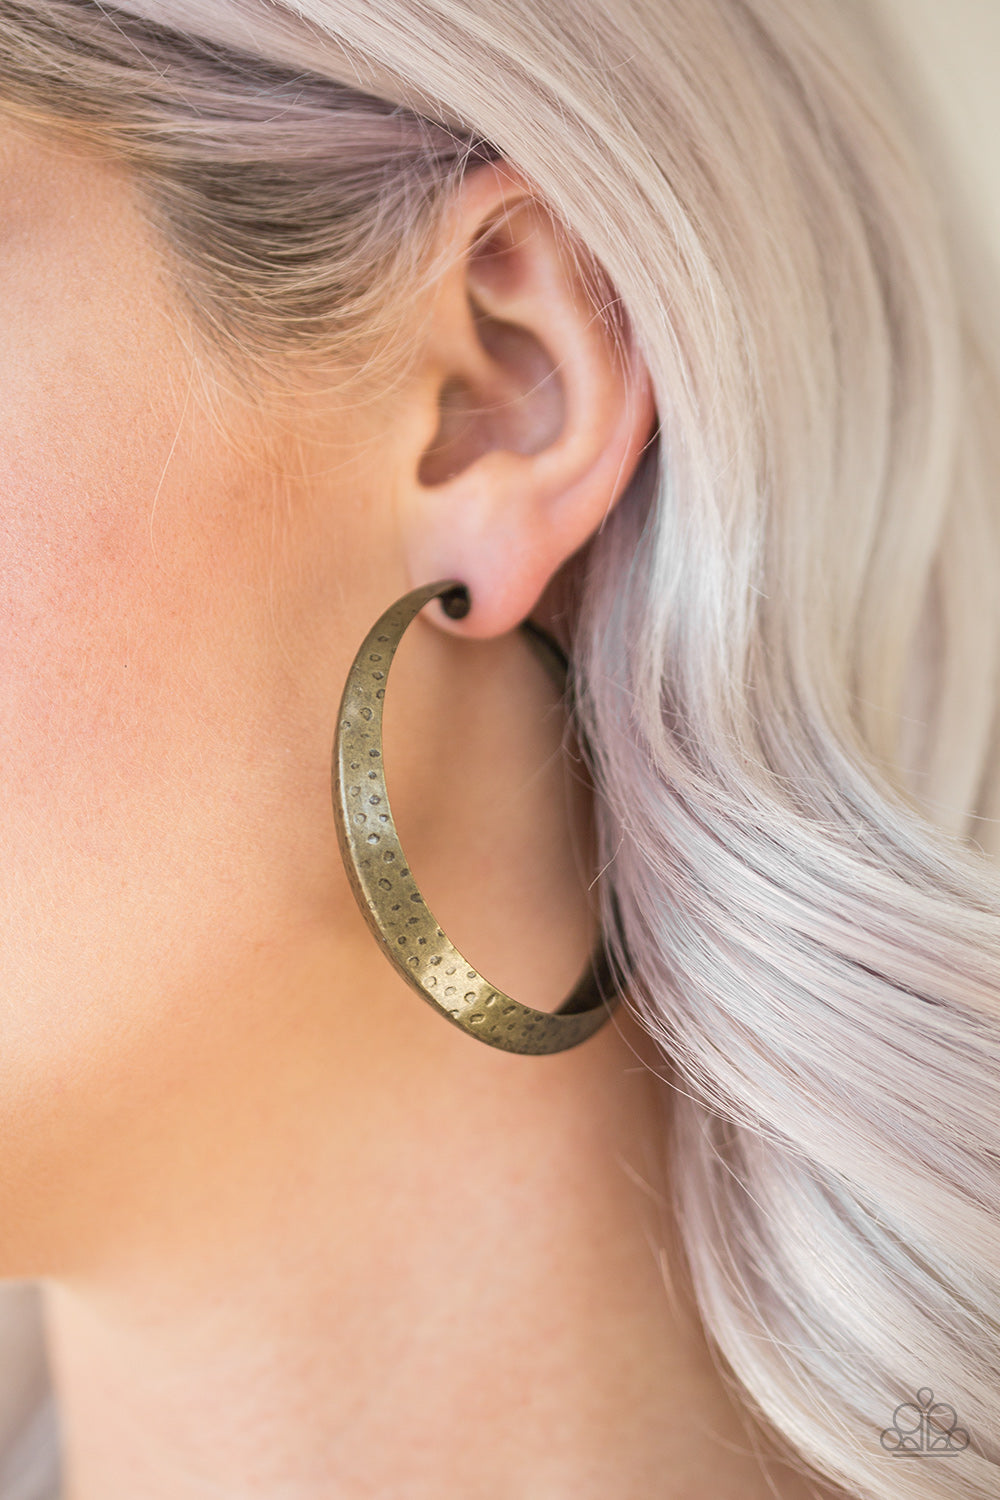 A thick brass hoop creases at the center, creating a chic 3-dimensional display. Finished in a hammered surface, the antiqued design evokes an indigenous inspired style. Earring attaches to standard post fitting. Hoop measures 2 1/4